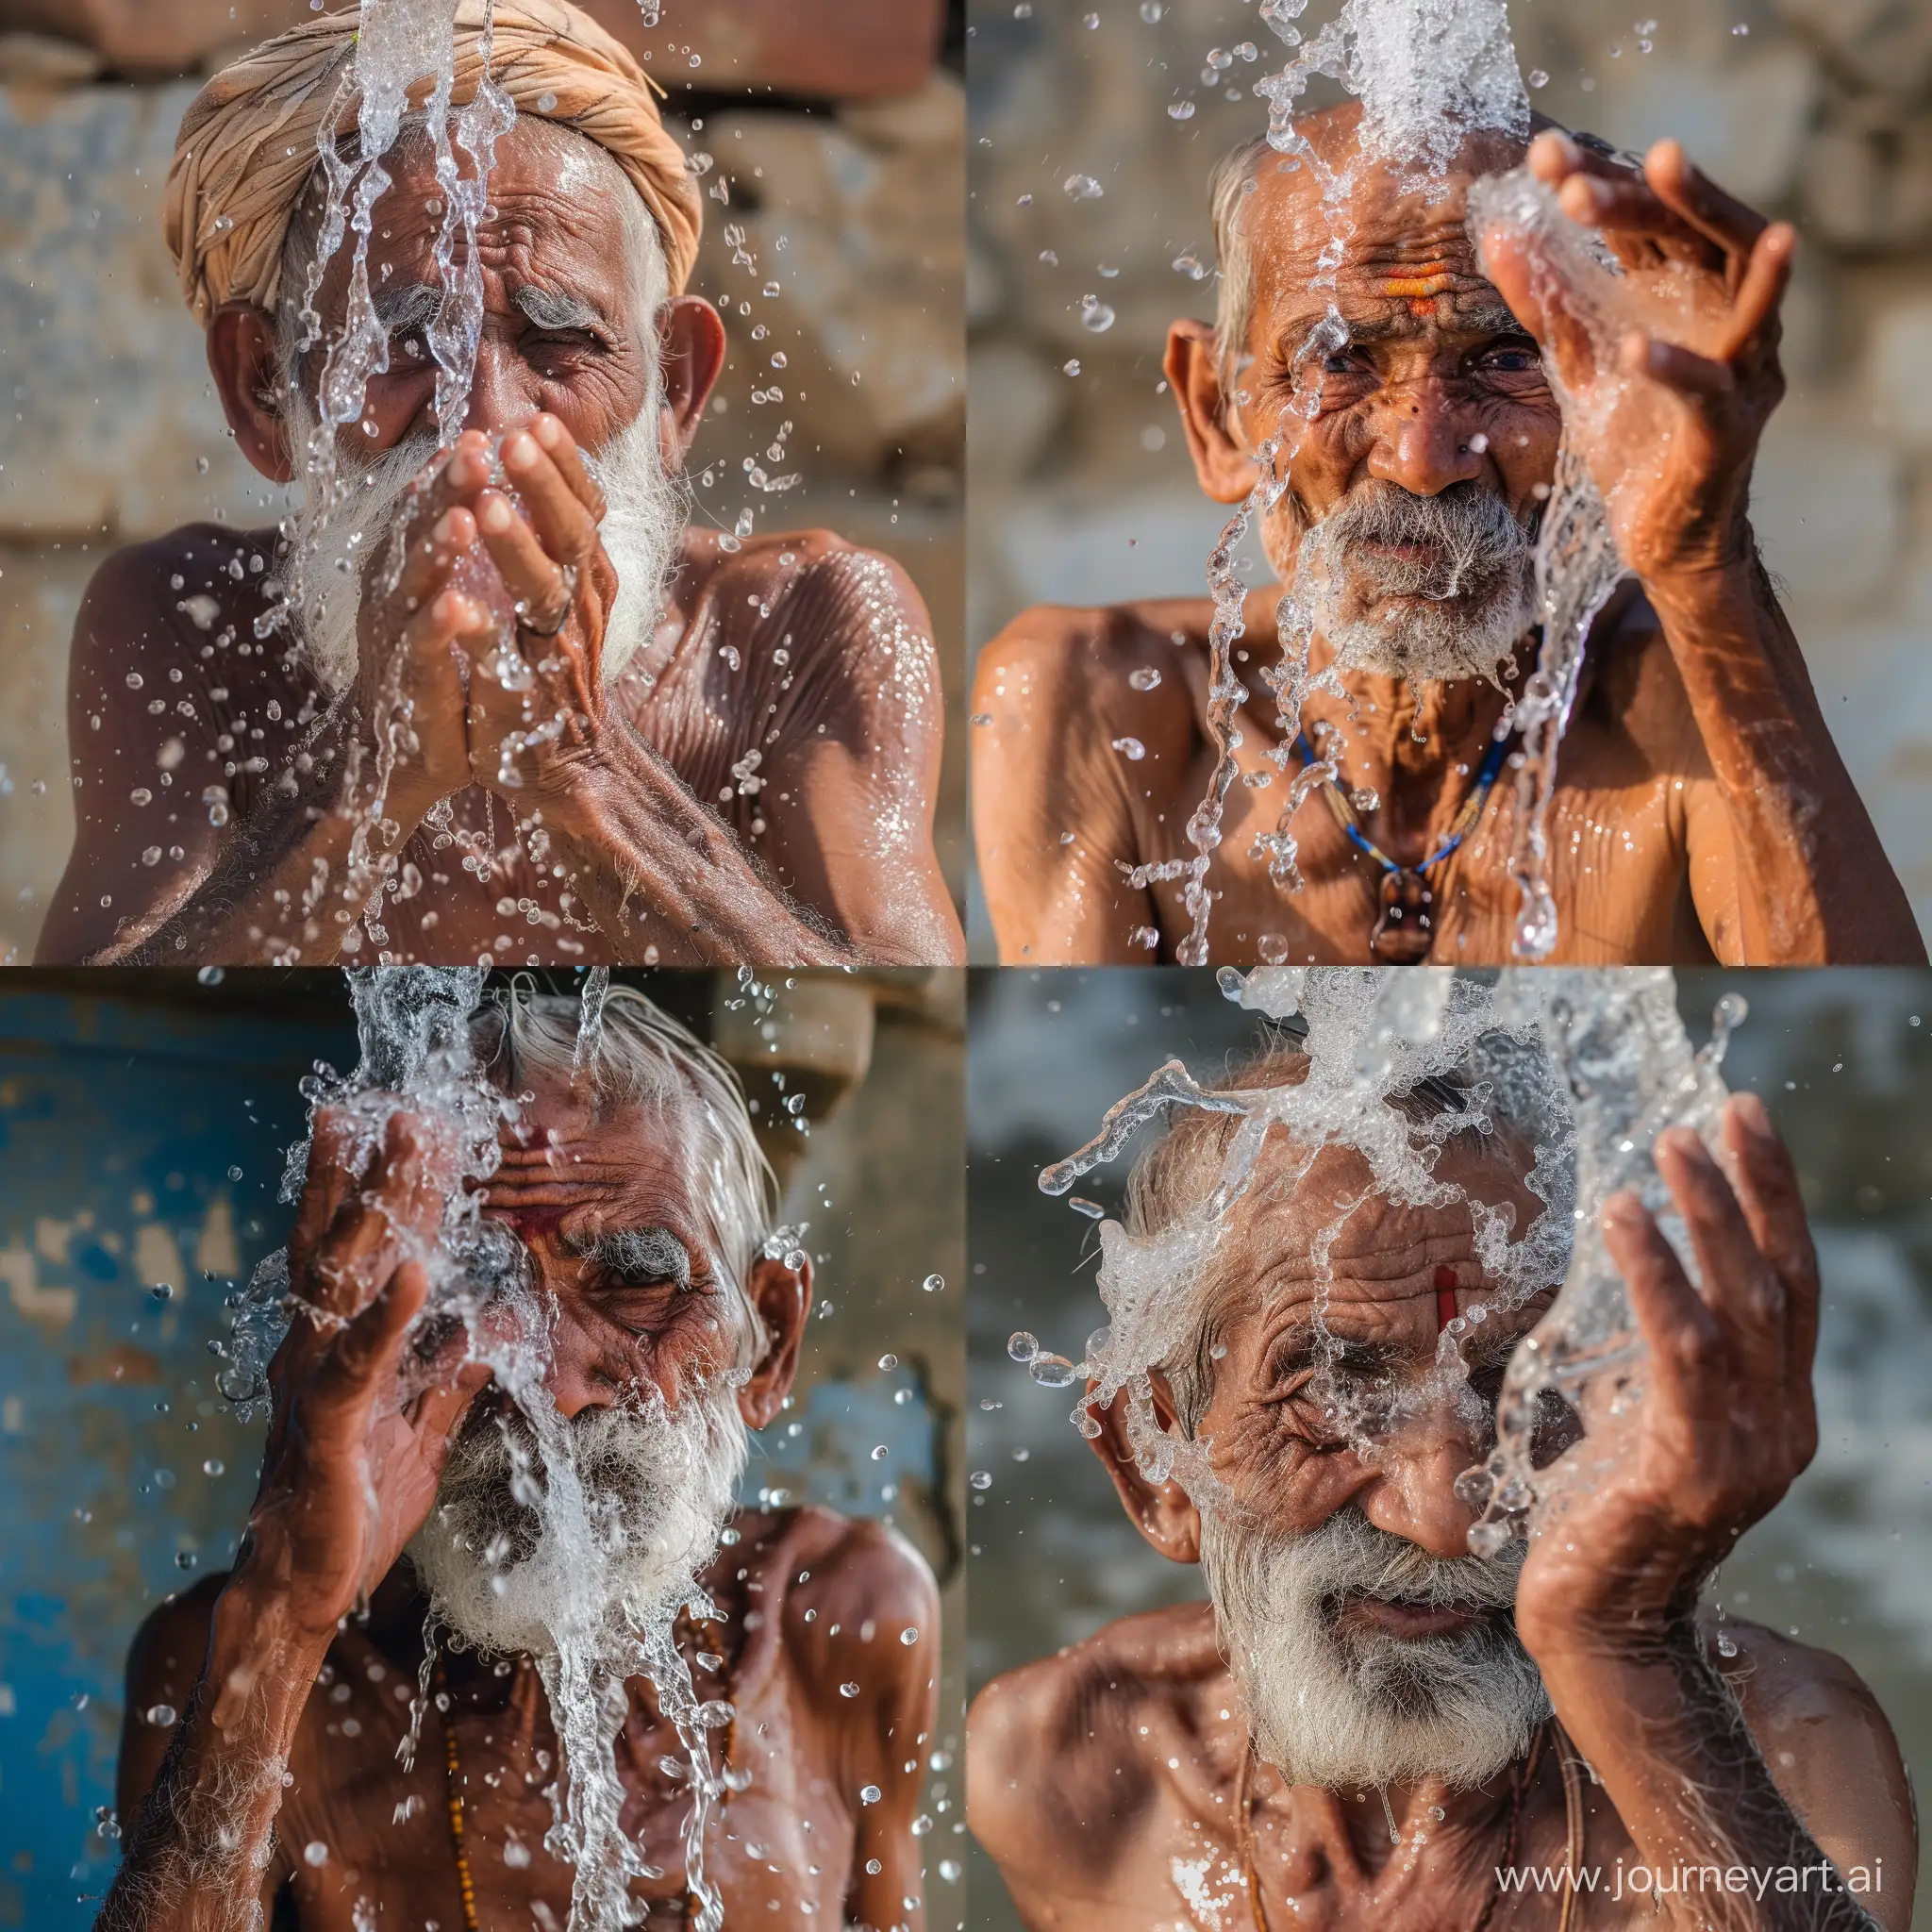 Very old skinny men rajasthan india throws water over his face background onscharp foto realistisch fuji xt5 50mm lens detailed